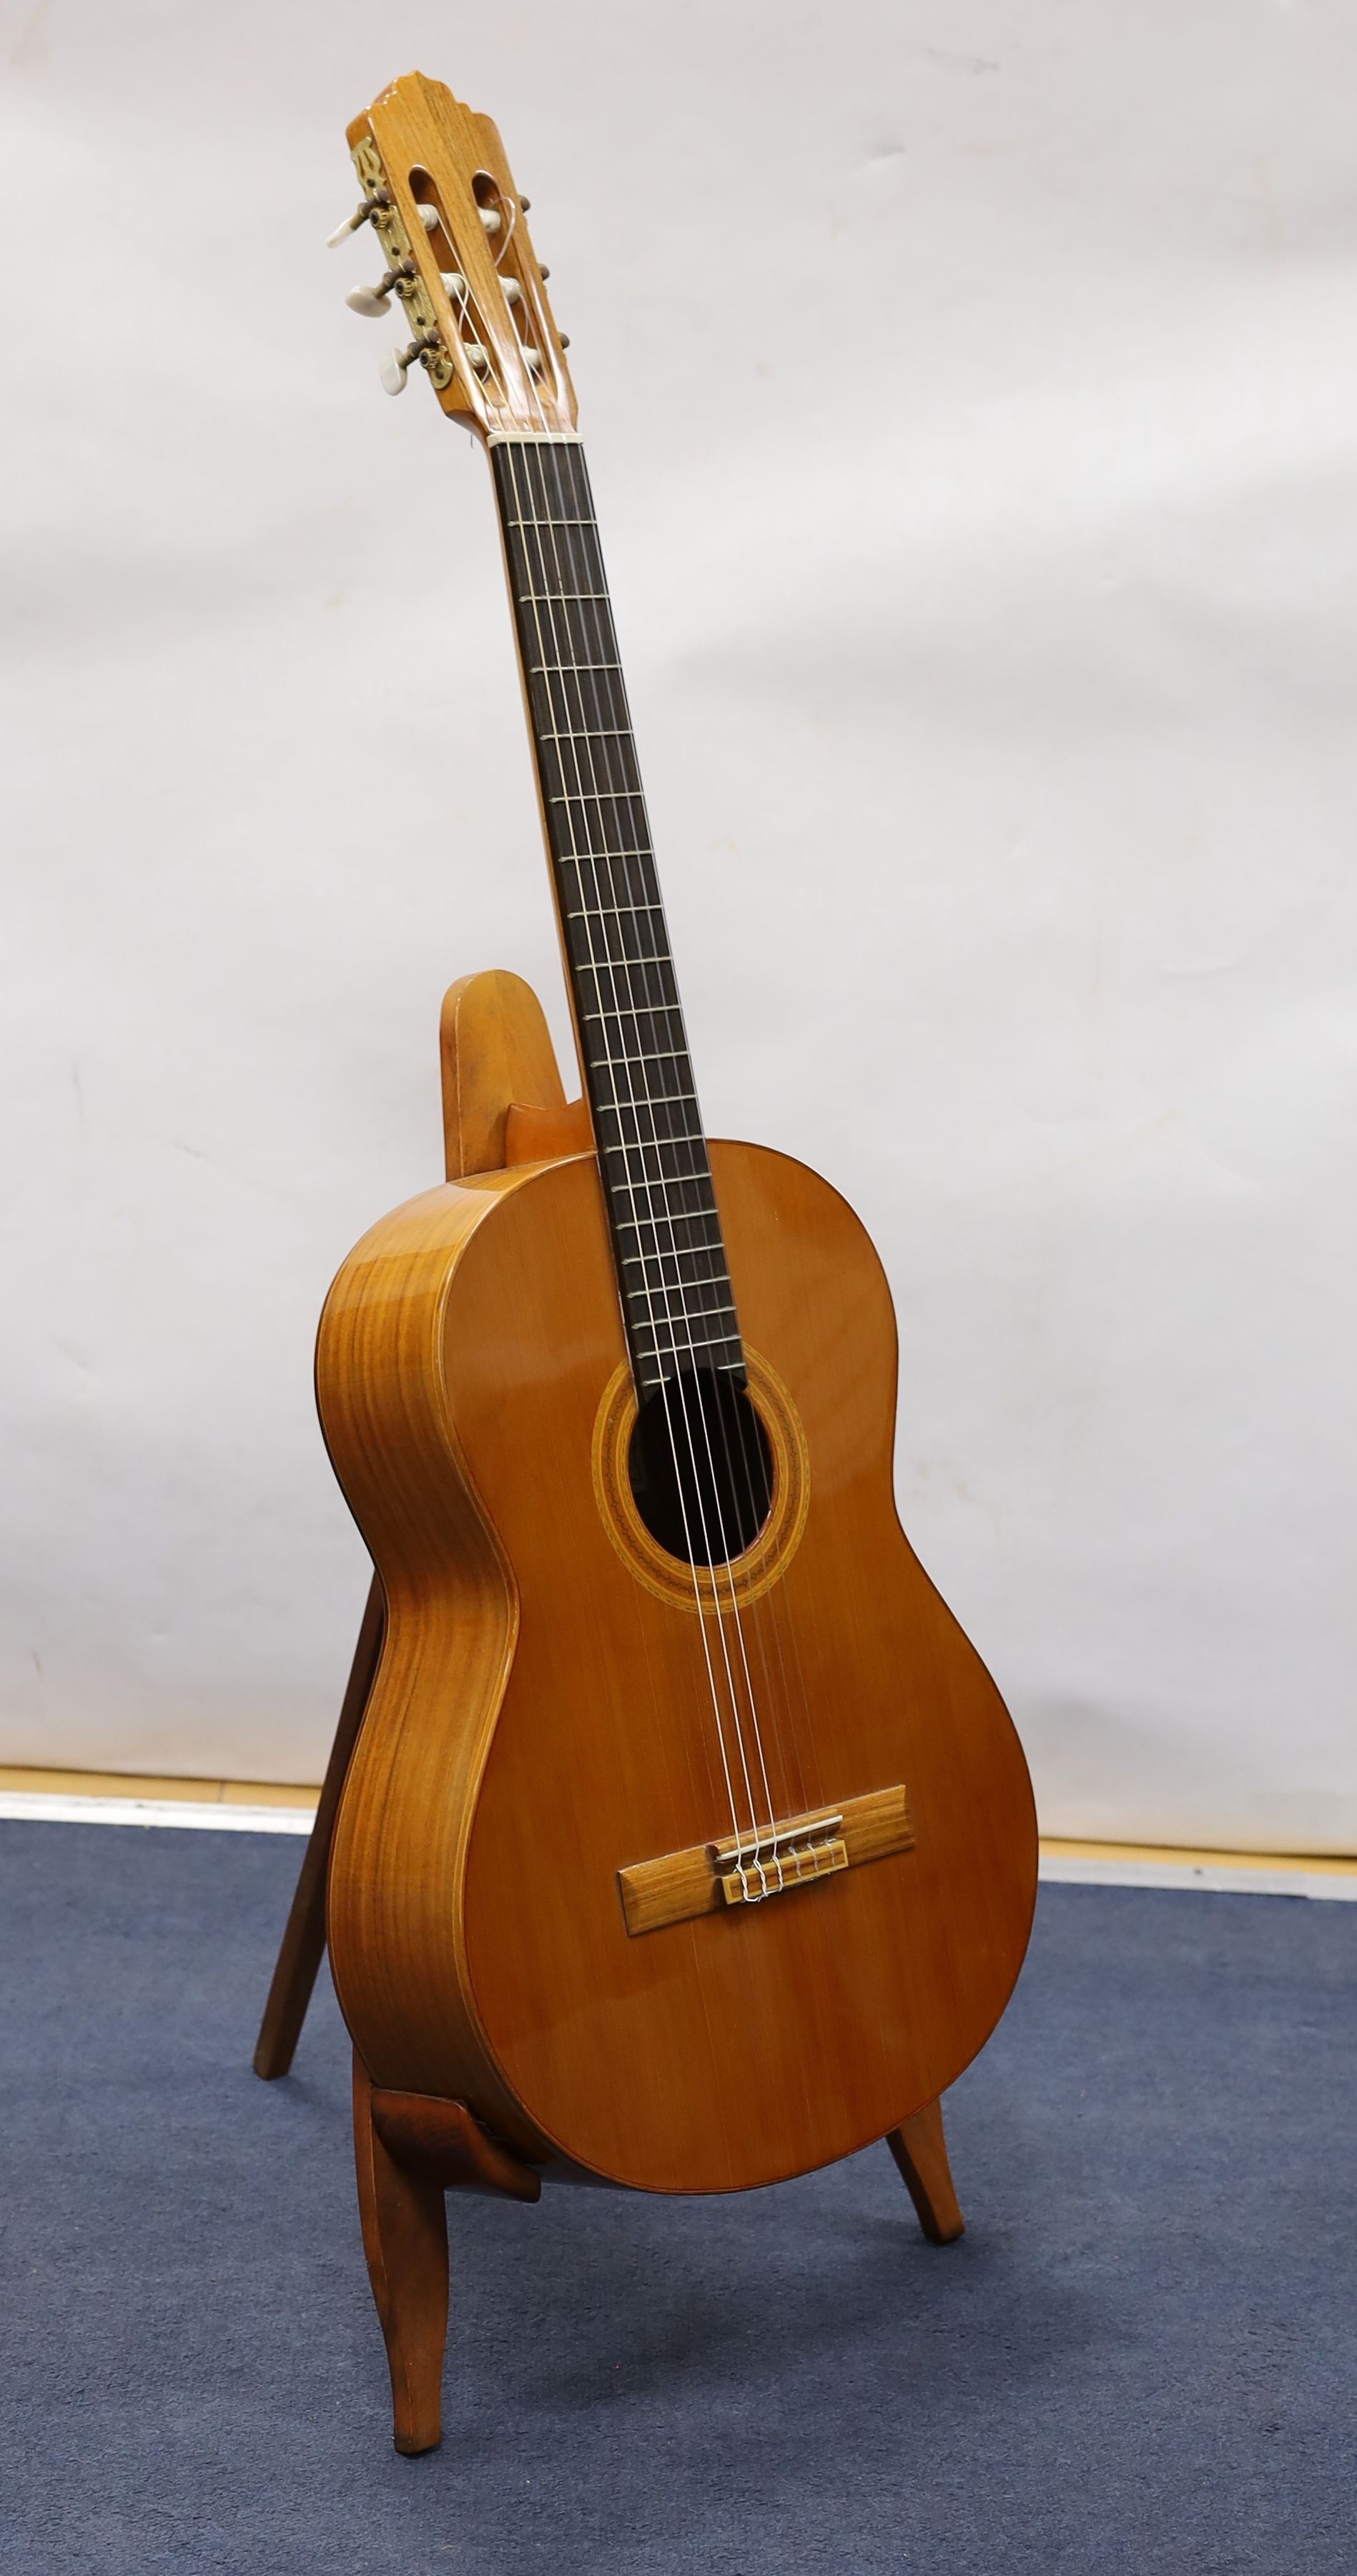 Manuel Rodriguez Model B Espana guitar with stand - Image 4 of 4